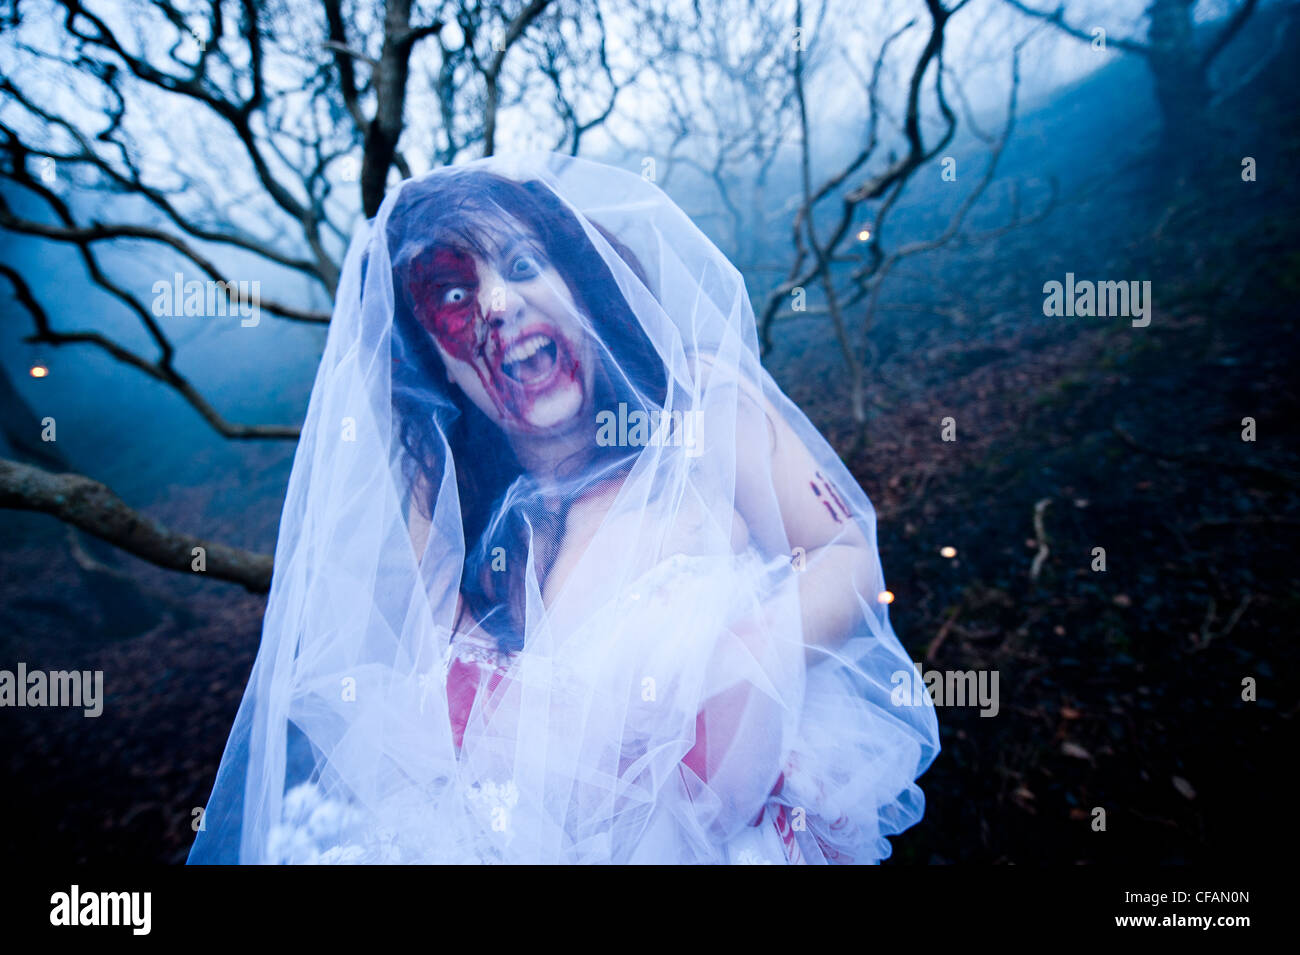 A young woman in full make-up taking part in a Zombie bride 'trash the wedding dress' Stock Photo